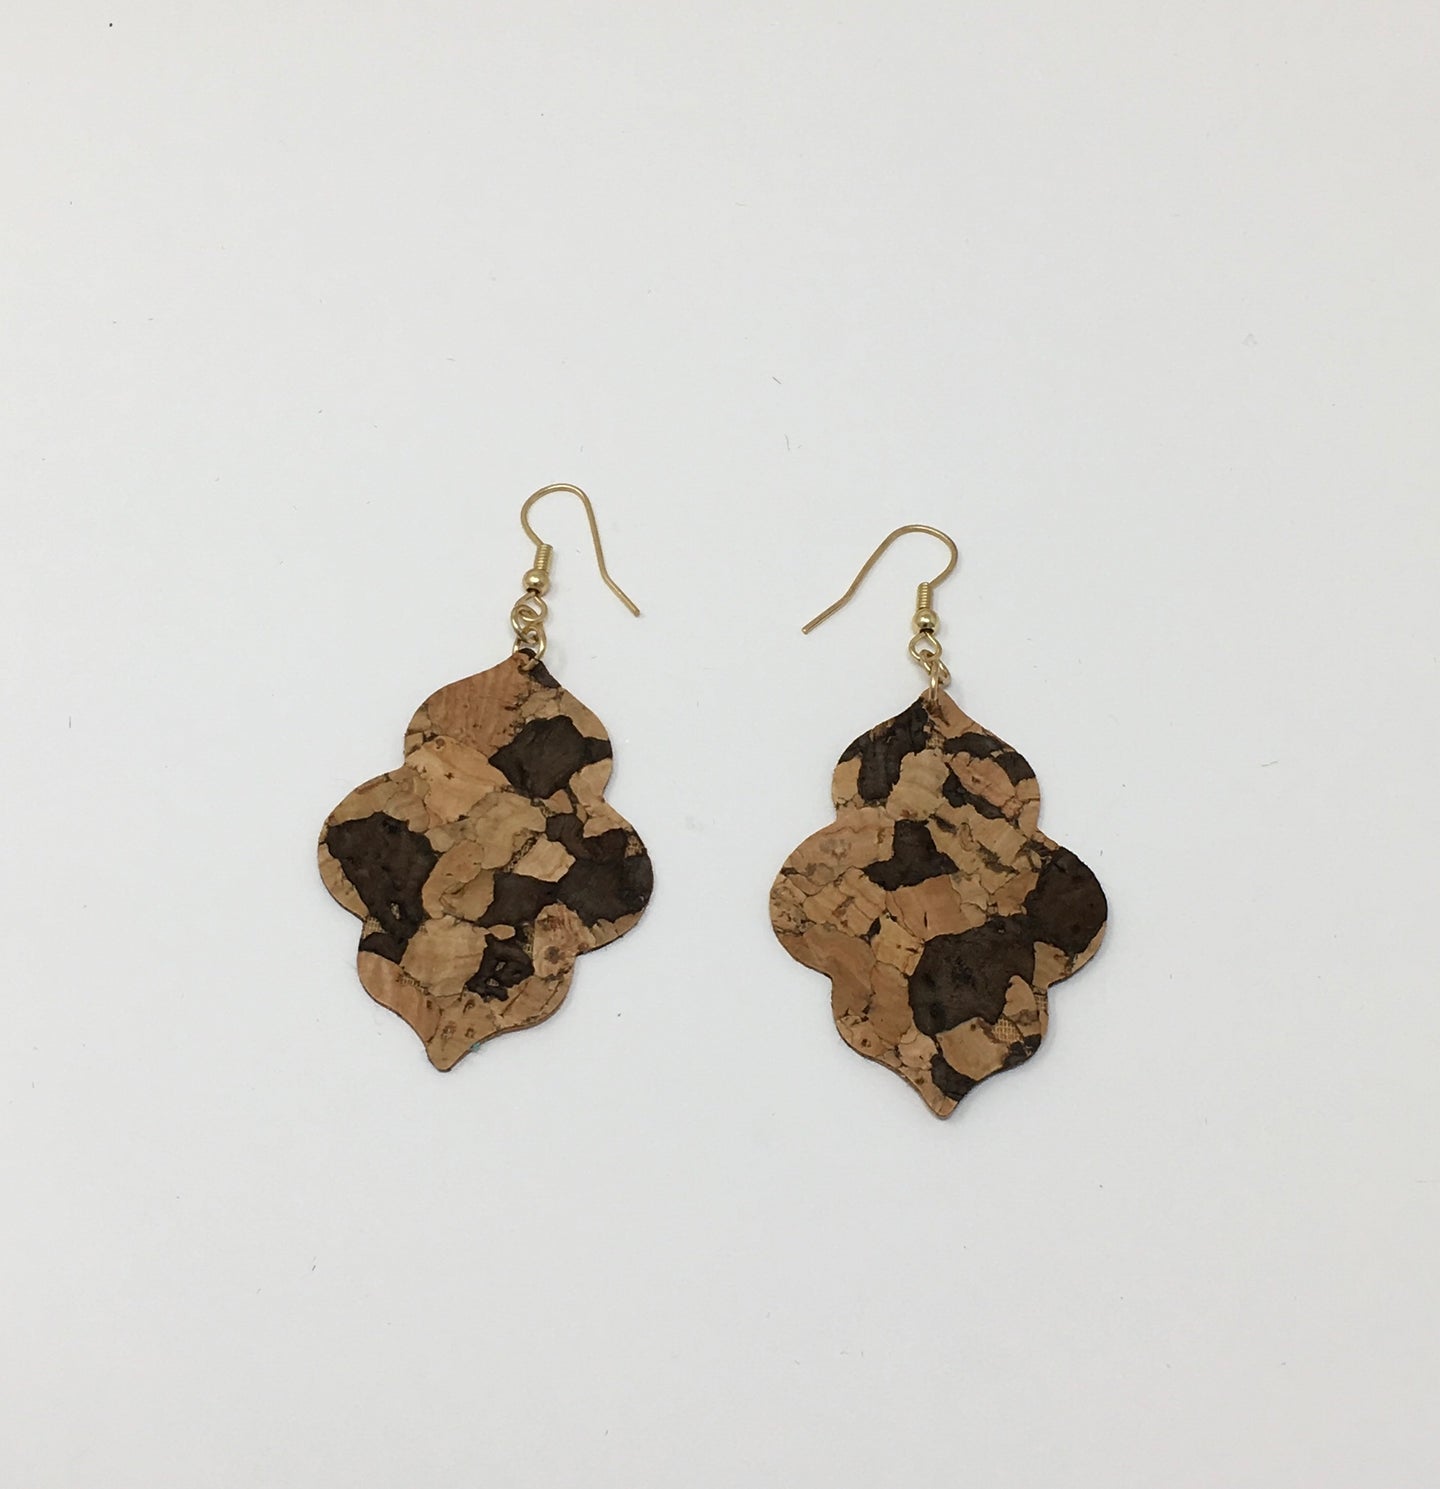 Cork Earrings with Scalloped Edges